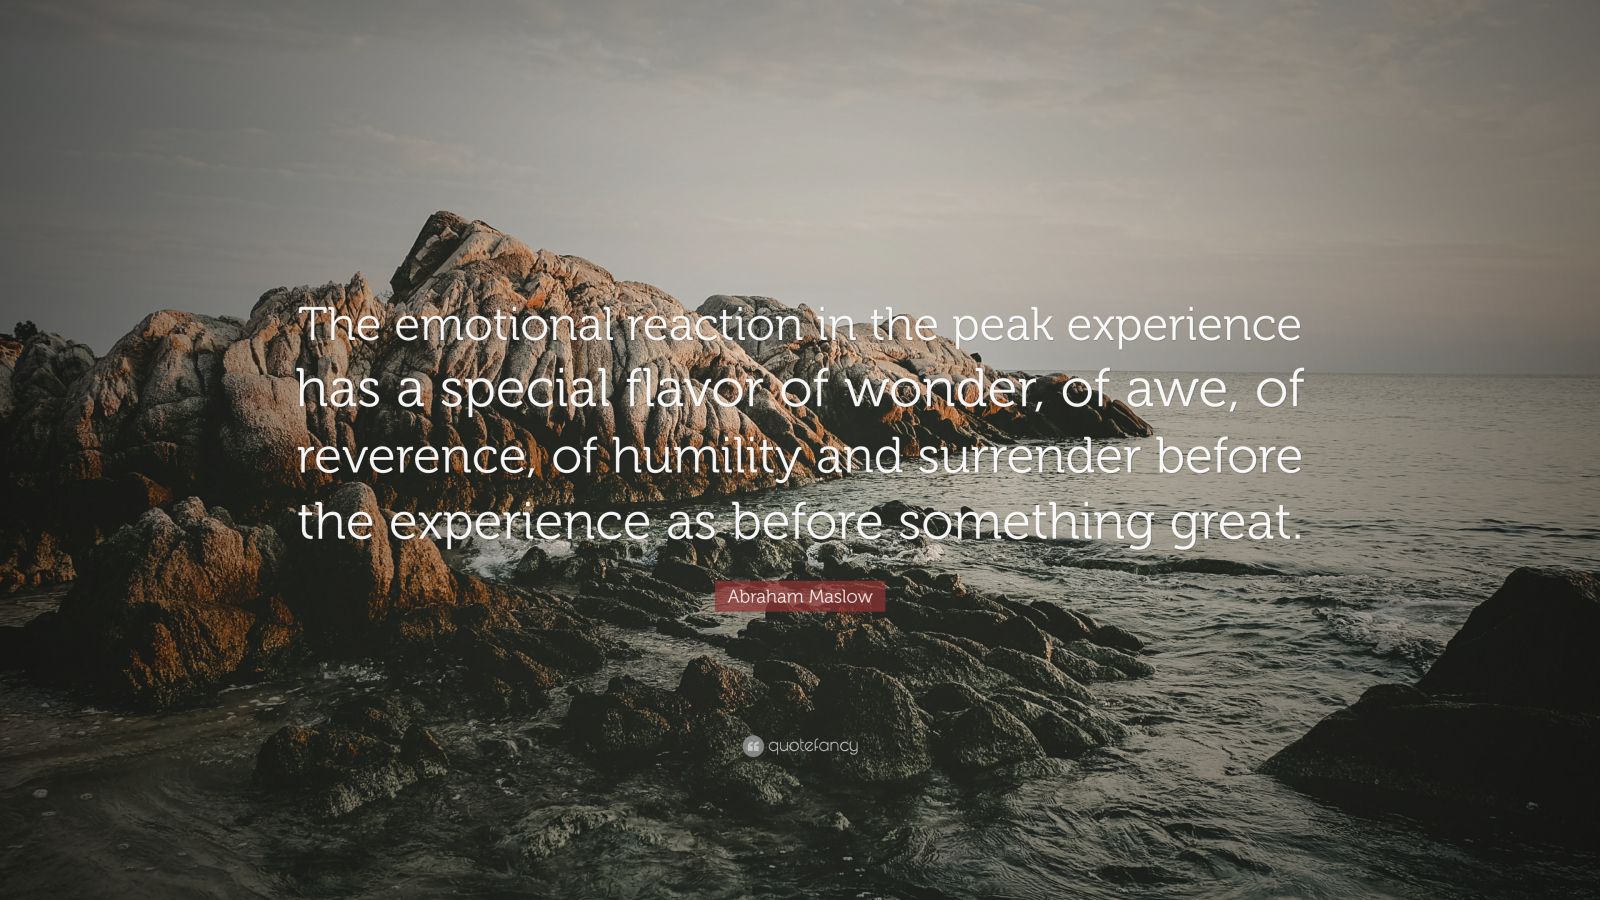 Abraham Maslow Quote: “The emotional reaction in the peak experience ...